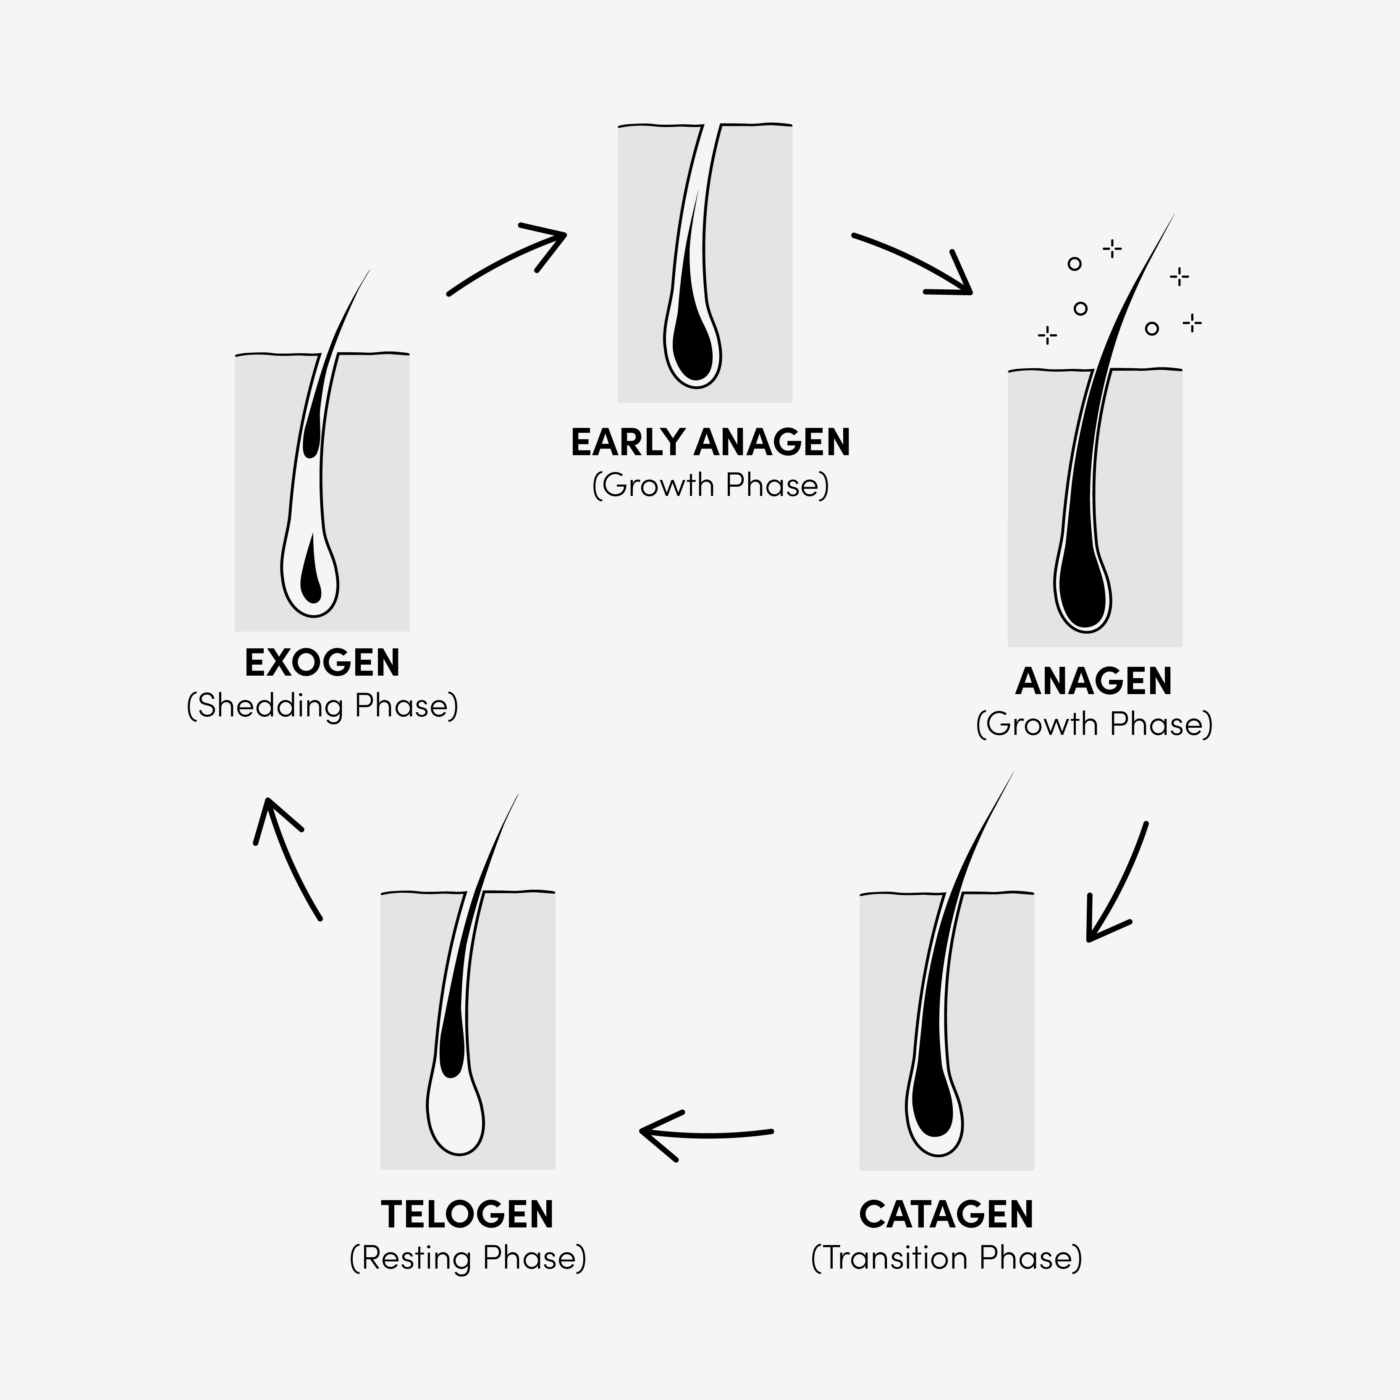 The hair growth cycle consists of four distinct phases: anagen (growth), catagen (transition), telogen (resting), and exogen (shedding).